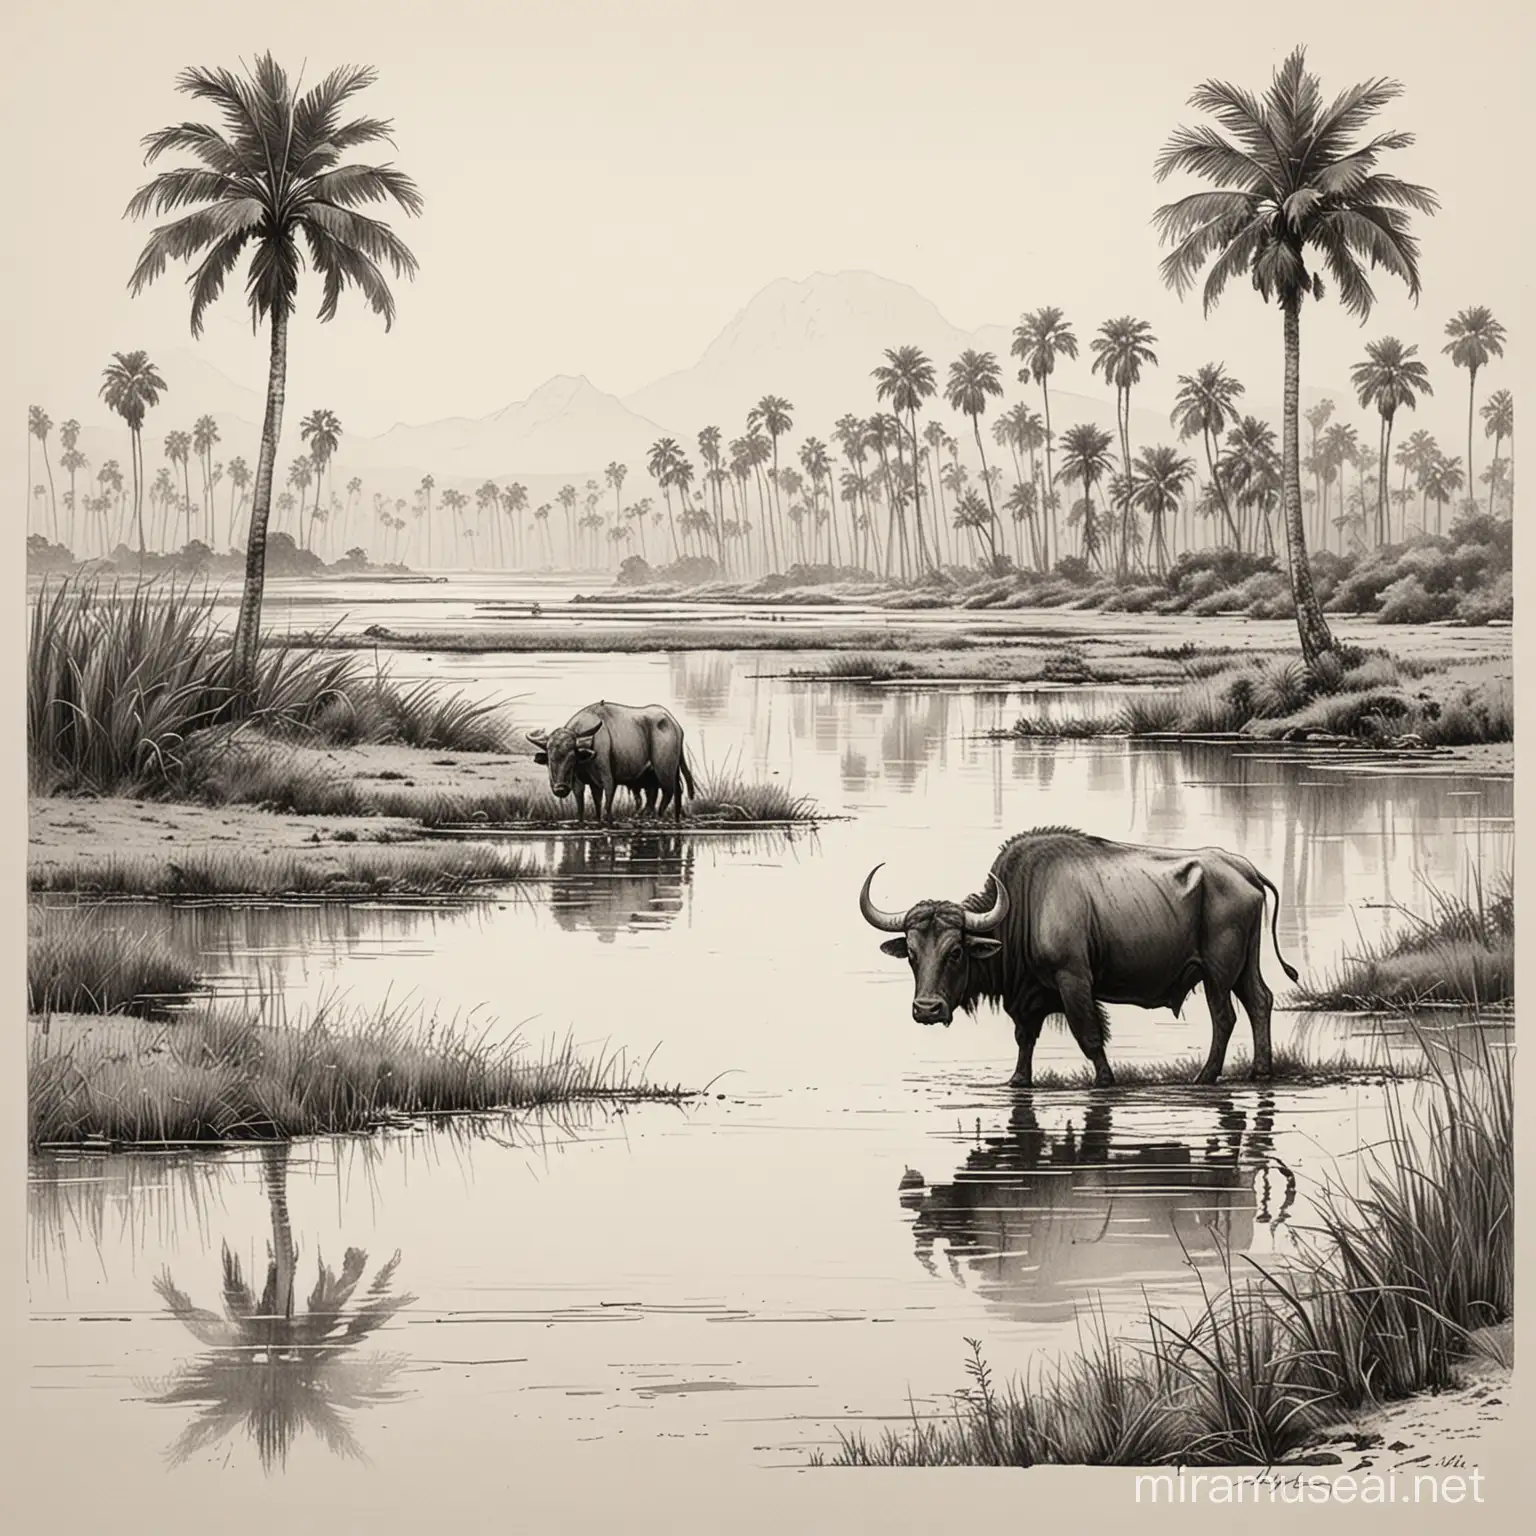 water buffalo, marshes, palm trees, sketch art, clean and simple art